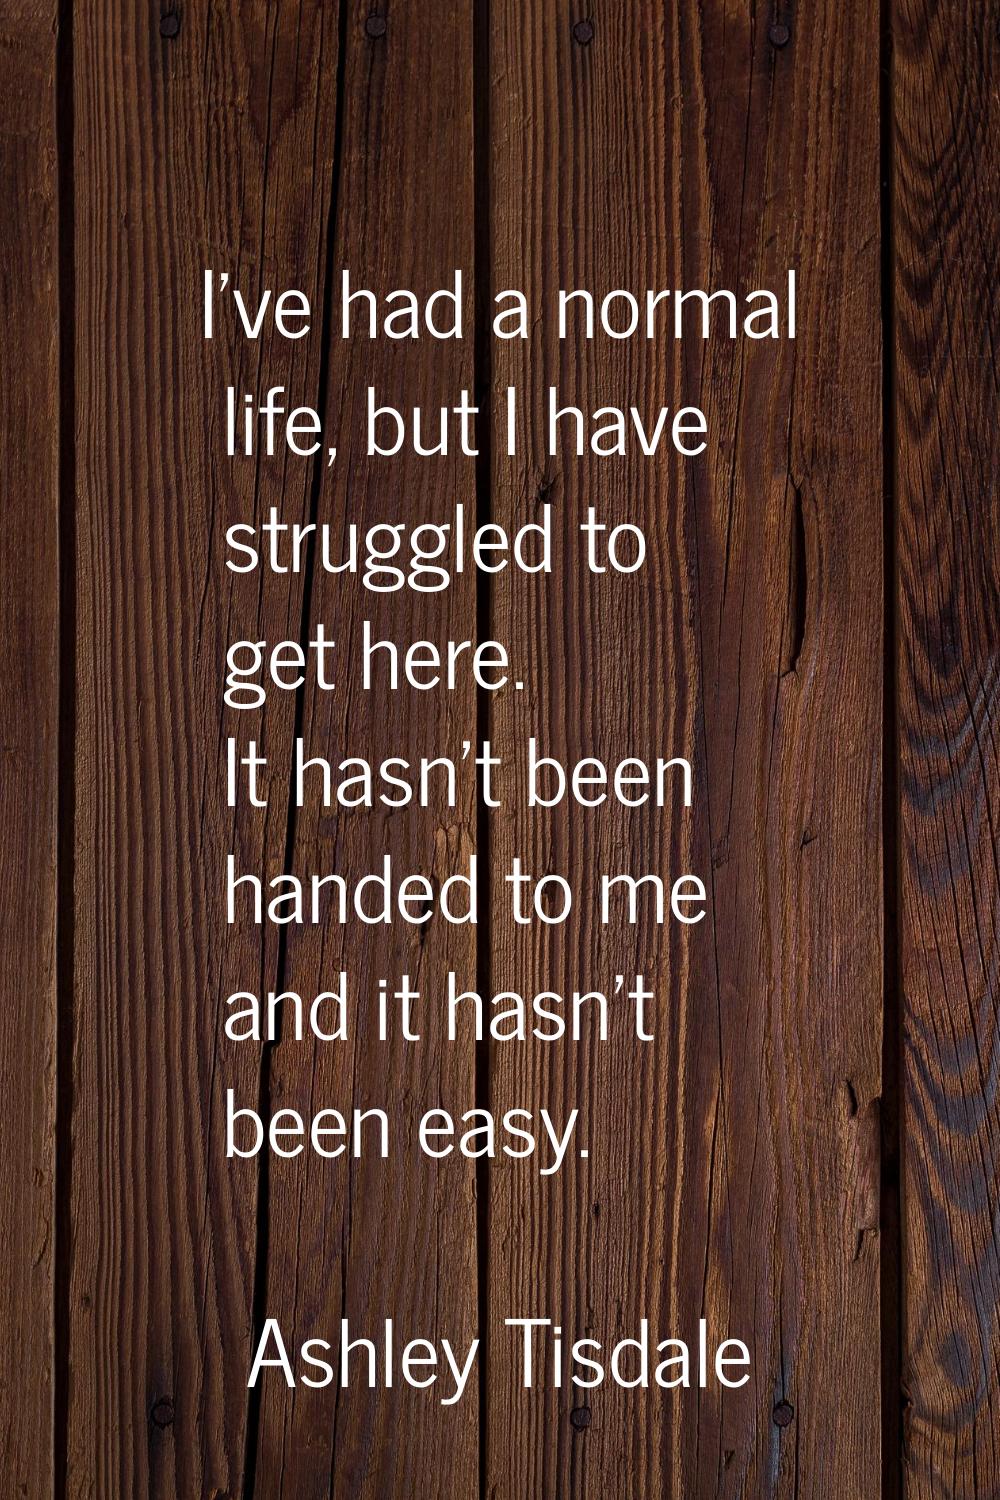 I've had a normal life, but I have struggled to get here. It hasn't been handed to me and it hasn't